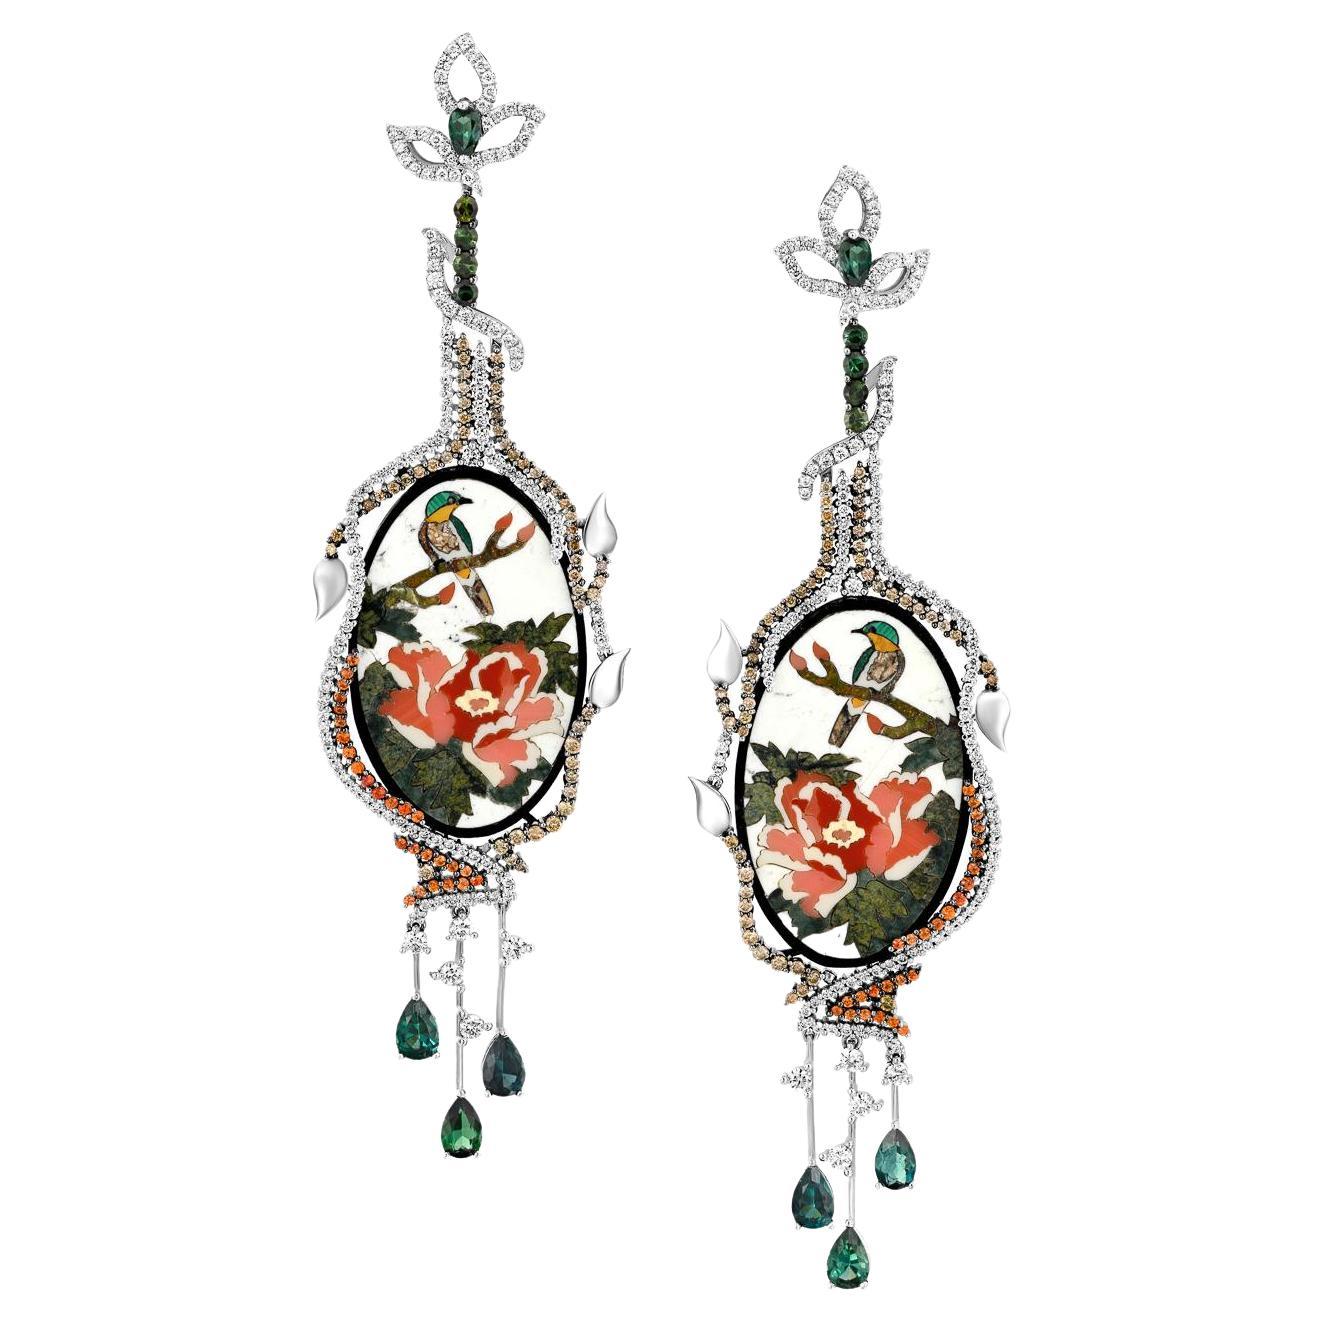 Ines Art Deco earrings featuring mother-of-pearl cabochon and sterling silver lever backs